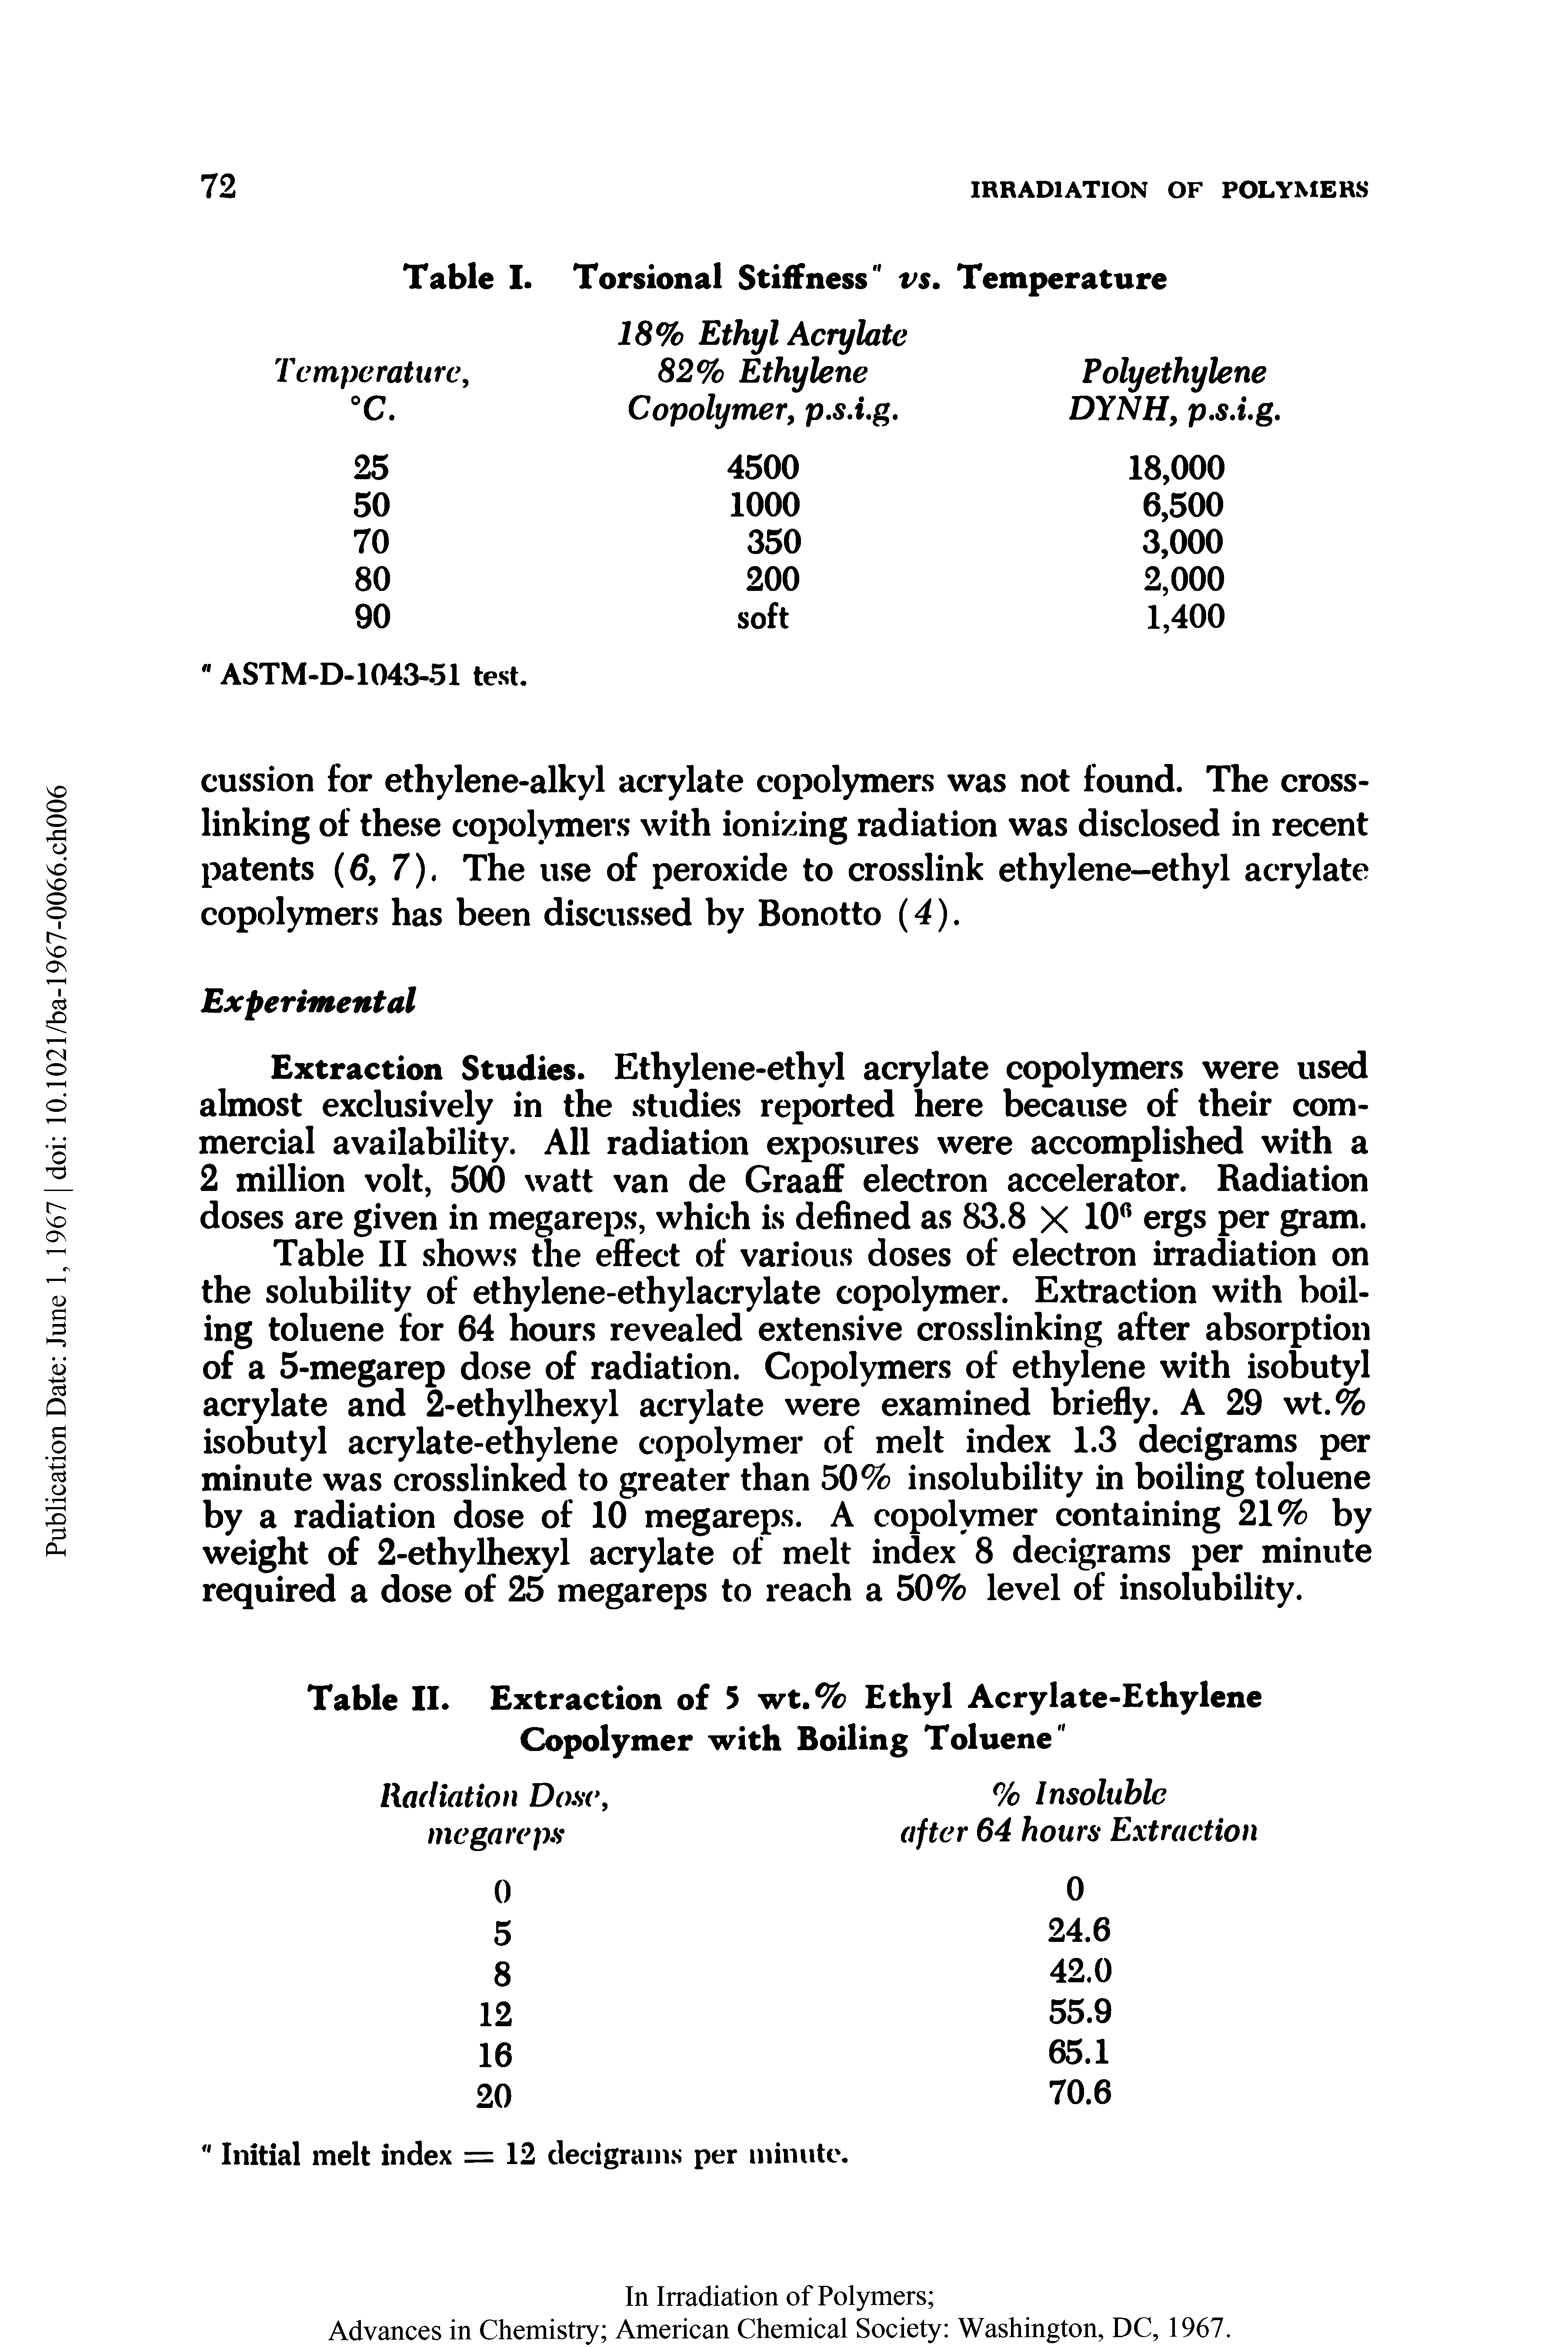 Table II shows the effect of various doses of electron irradiation on the solubility of ethylene-ethylacrylate copolymer. Extraction with boiling toluene for 64 hours revealed extensive crosslinking after absorption of a 5-megarep dose of radiation. Copolymers of ethylene with isobutyl acrylate and 2-ethylhexyl acrylate were examined briefly. A 29 wt.% isobutyl acrylate-ethylene copolymer of melt index 1.3 decigrams per minute was crosslinked to greater than 50% insolubility in boiling toluene by a radiation dose of 10 megareps. A copolymer containing 21% by weight of 2-ethylhexyl acrylate of melt index 8 decigrams per minute required a dose of 25 megareps to reach a 50% level of insolubility.